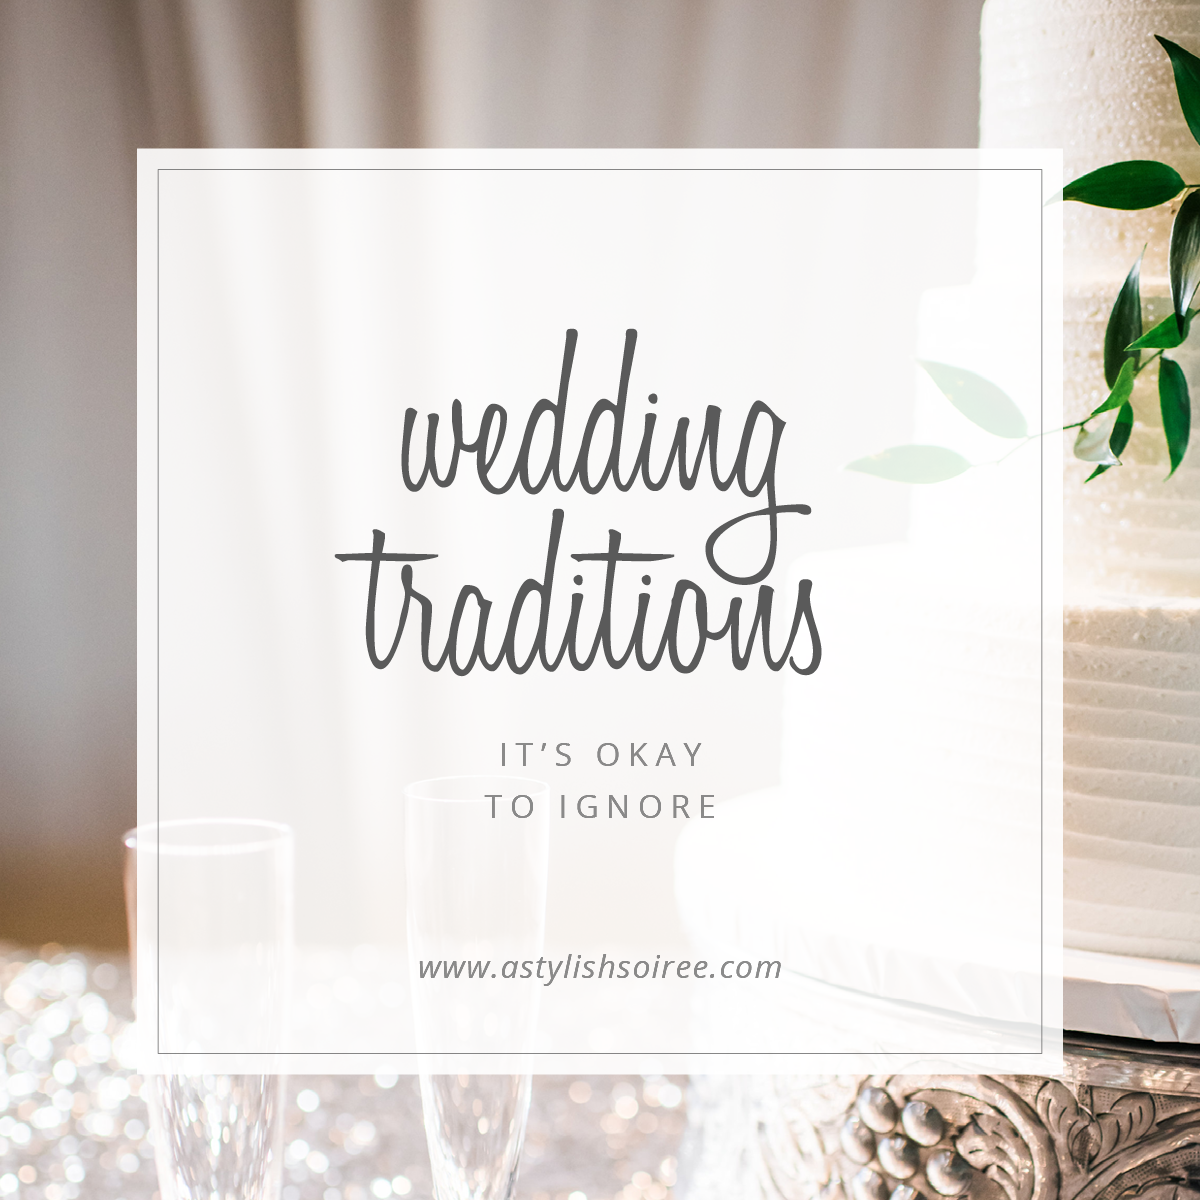 Planning Weddings | Wedding Traditions You Can Ignore